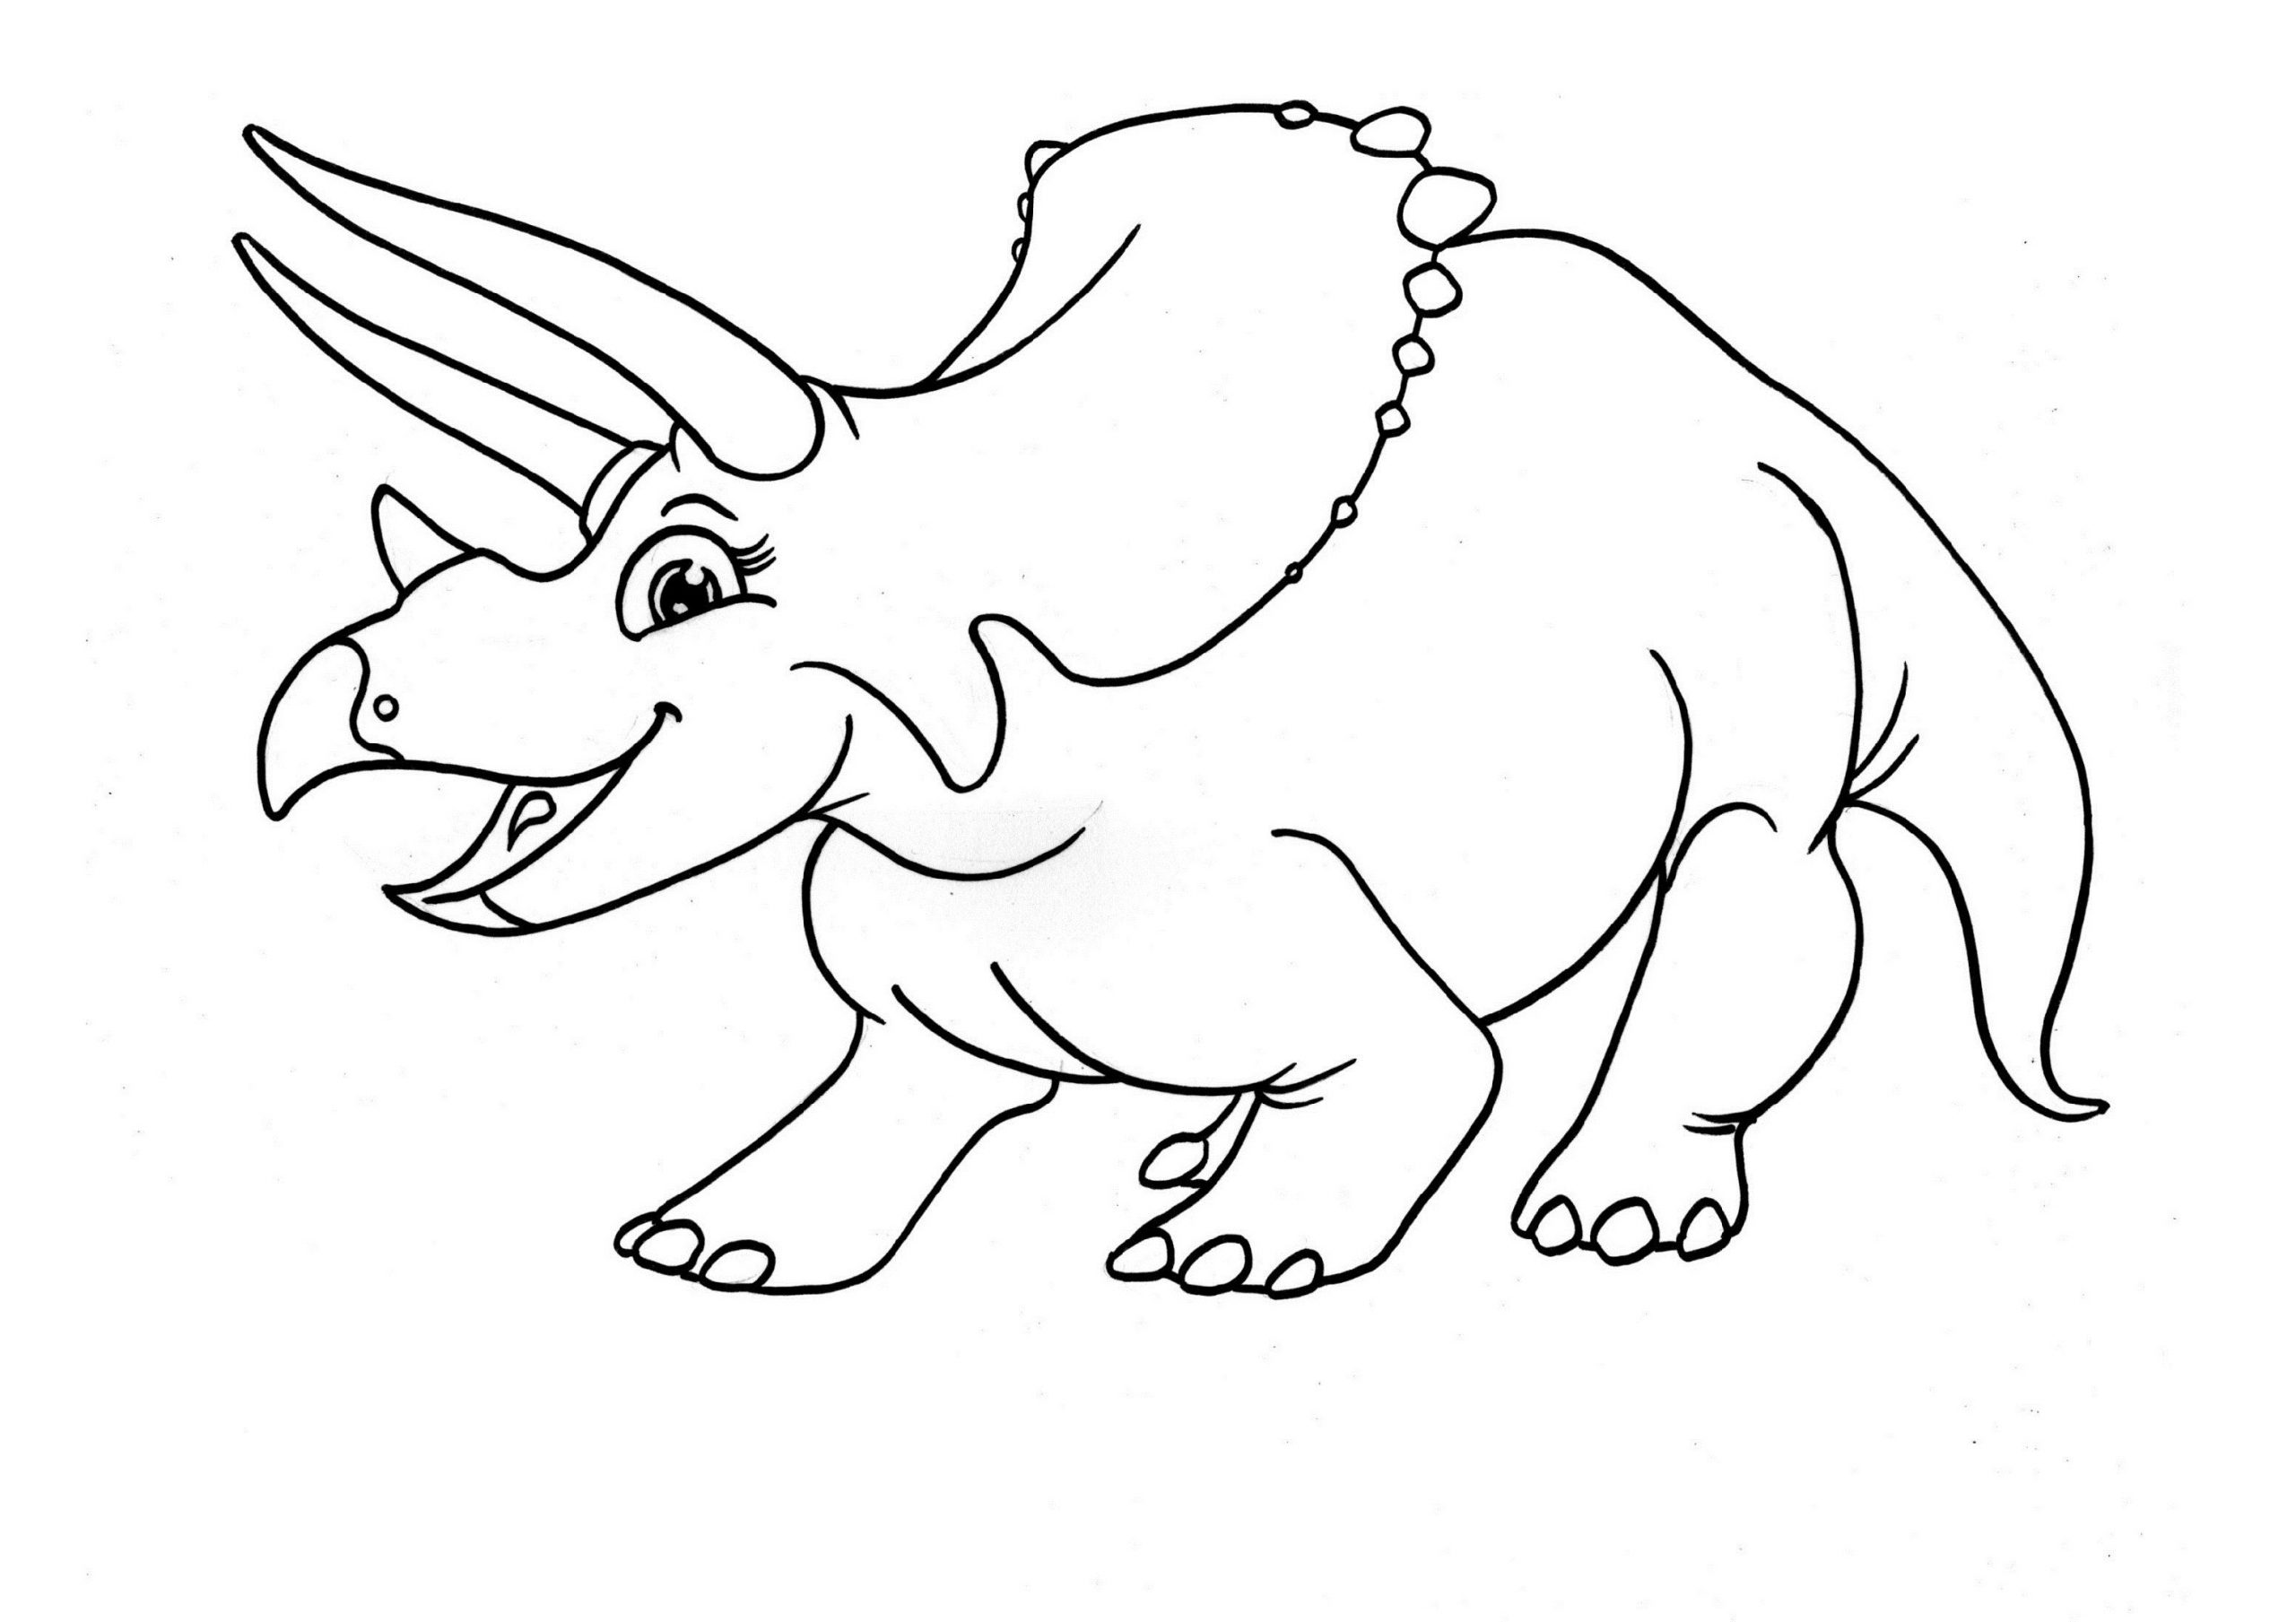 Download Triceratops Coloring Pages Dinosaur | 101 Coloring